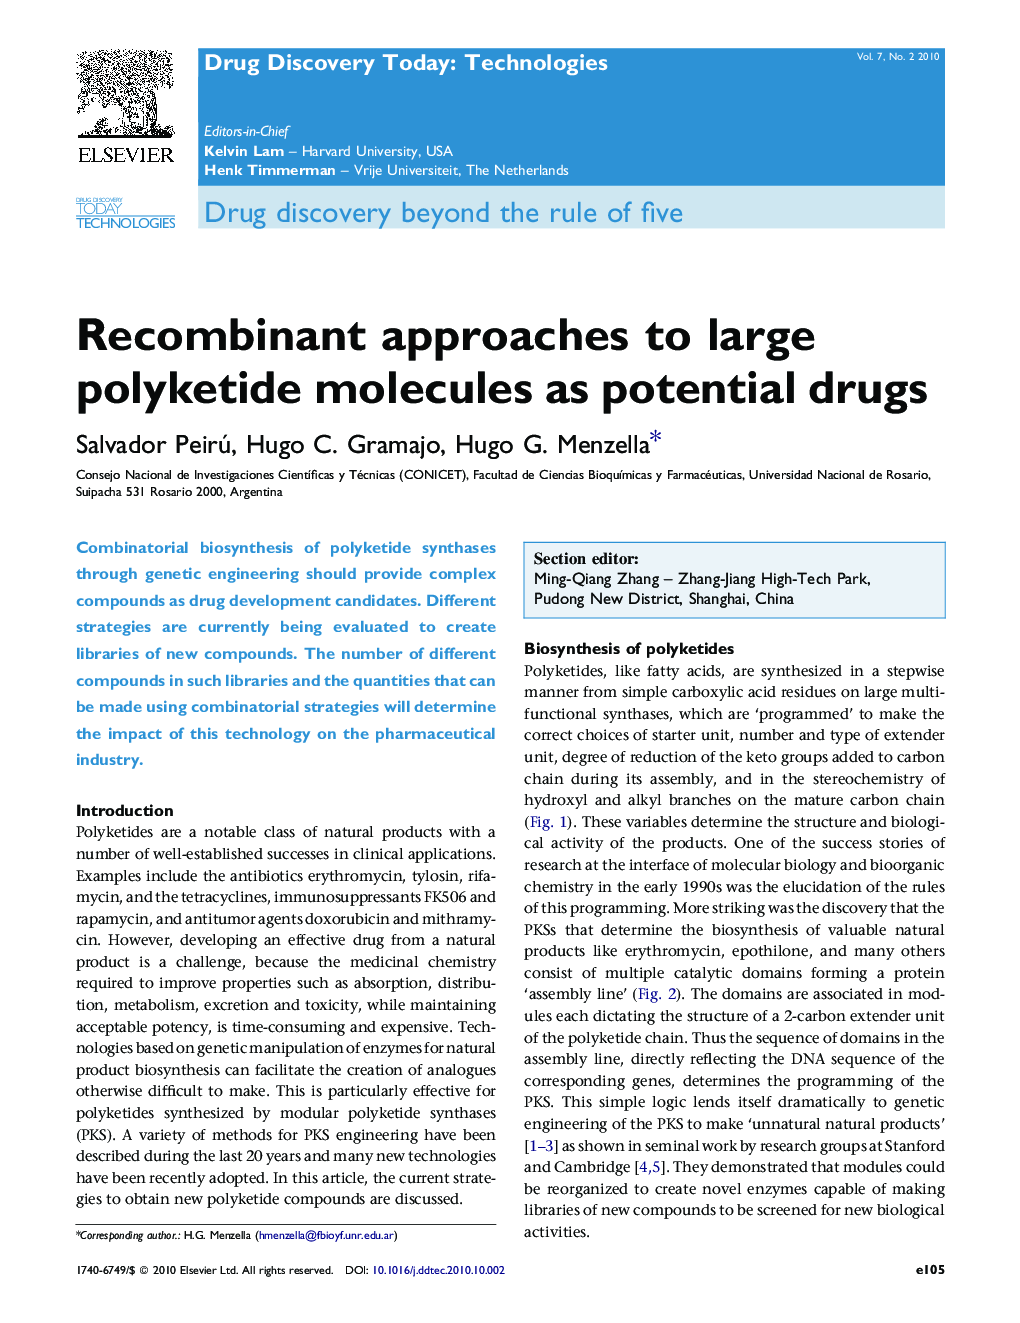 Recombinant approaches to large polyketide molecules as potential drugs